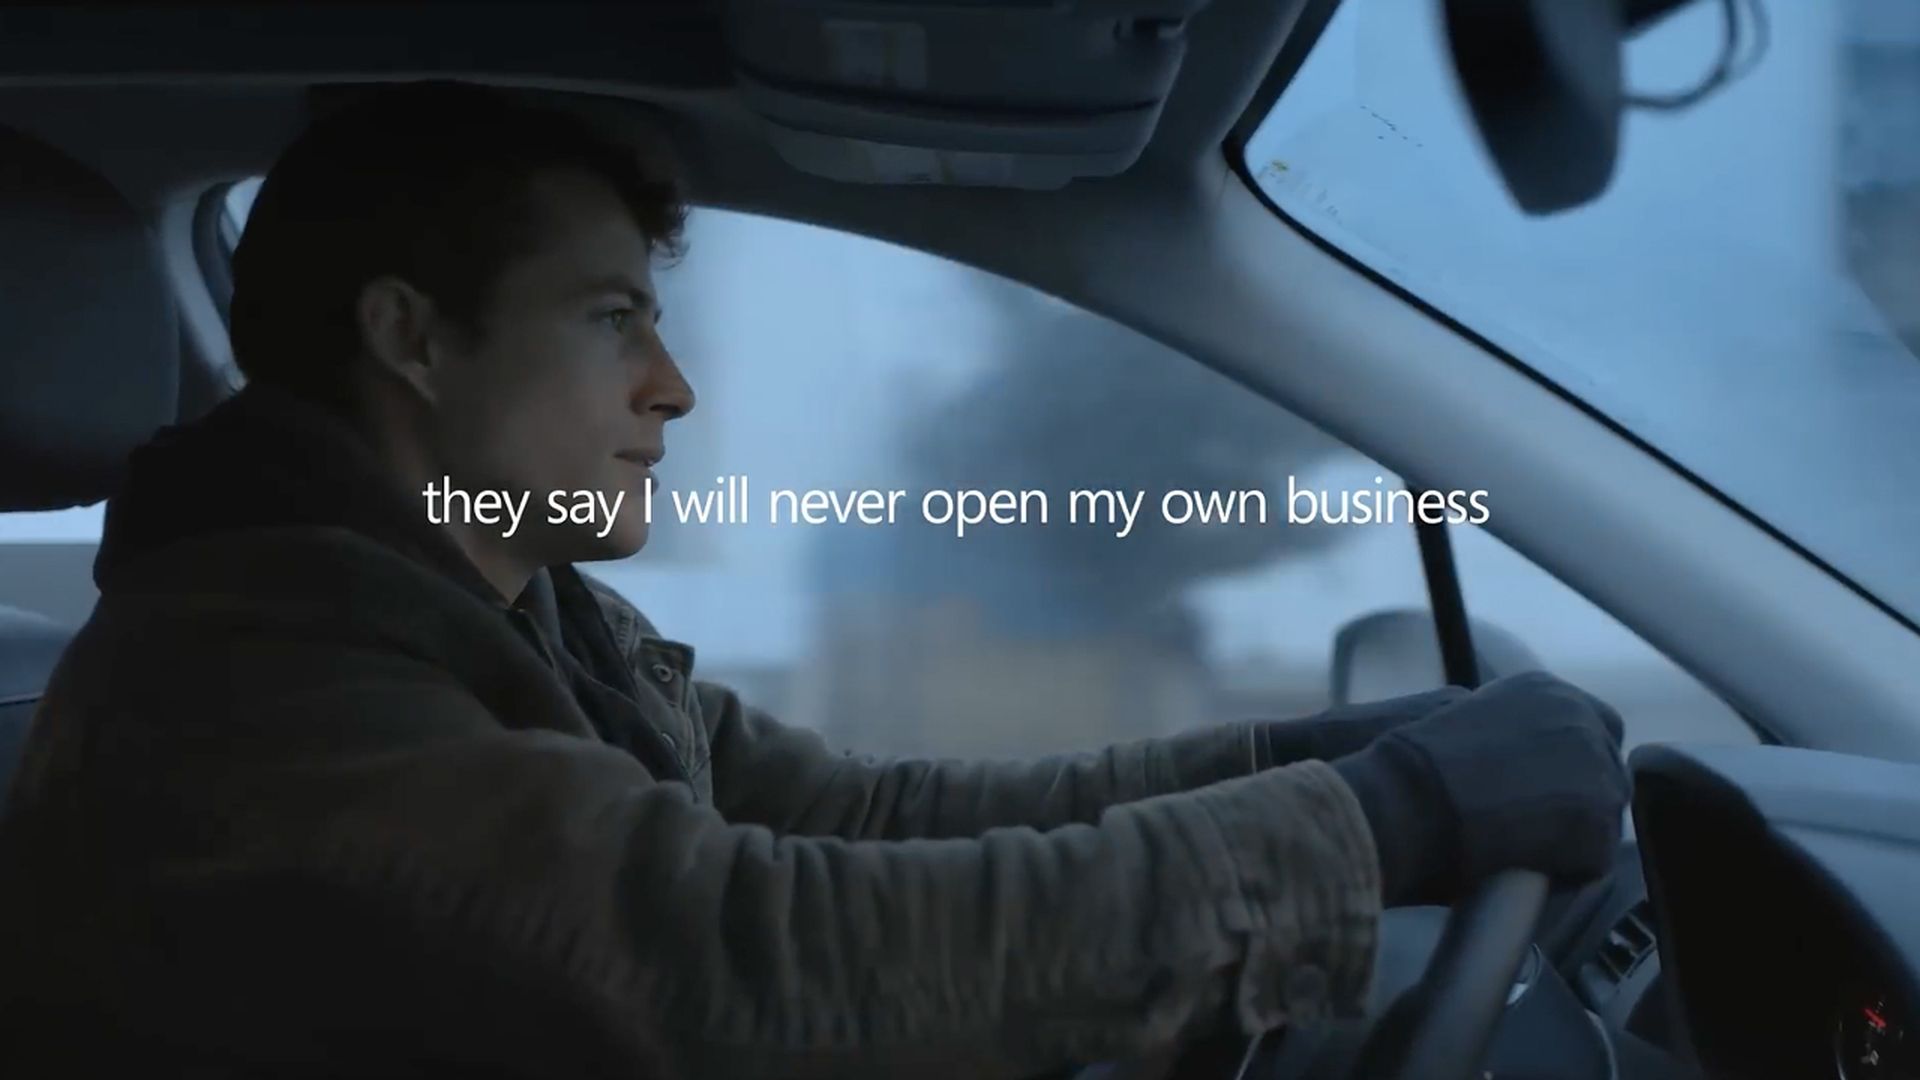 Screen capture from Microsoft Copilot ad showing a man at a car's steering wheel with the words "They say I will never open my own business" overlaid